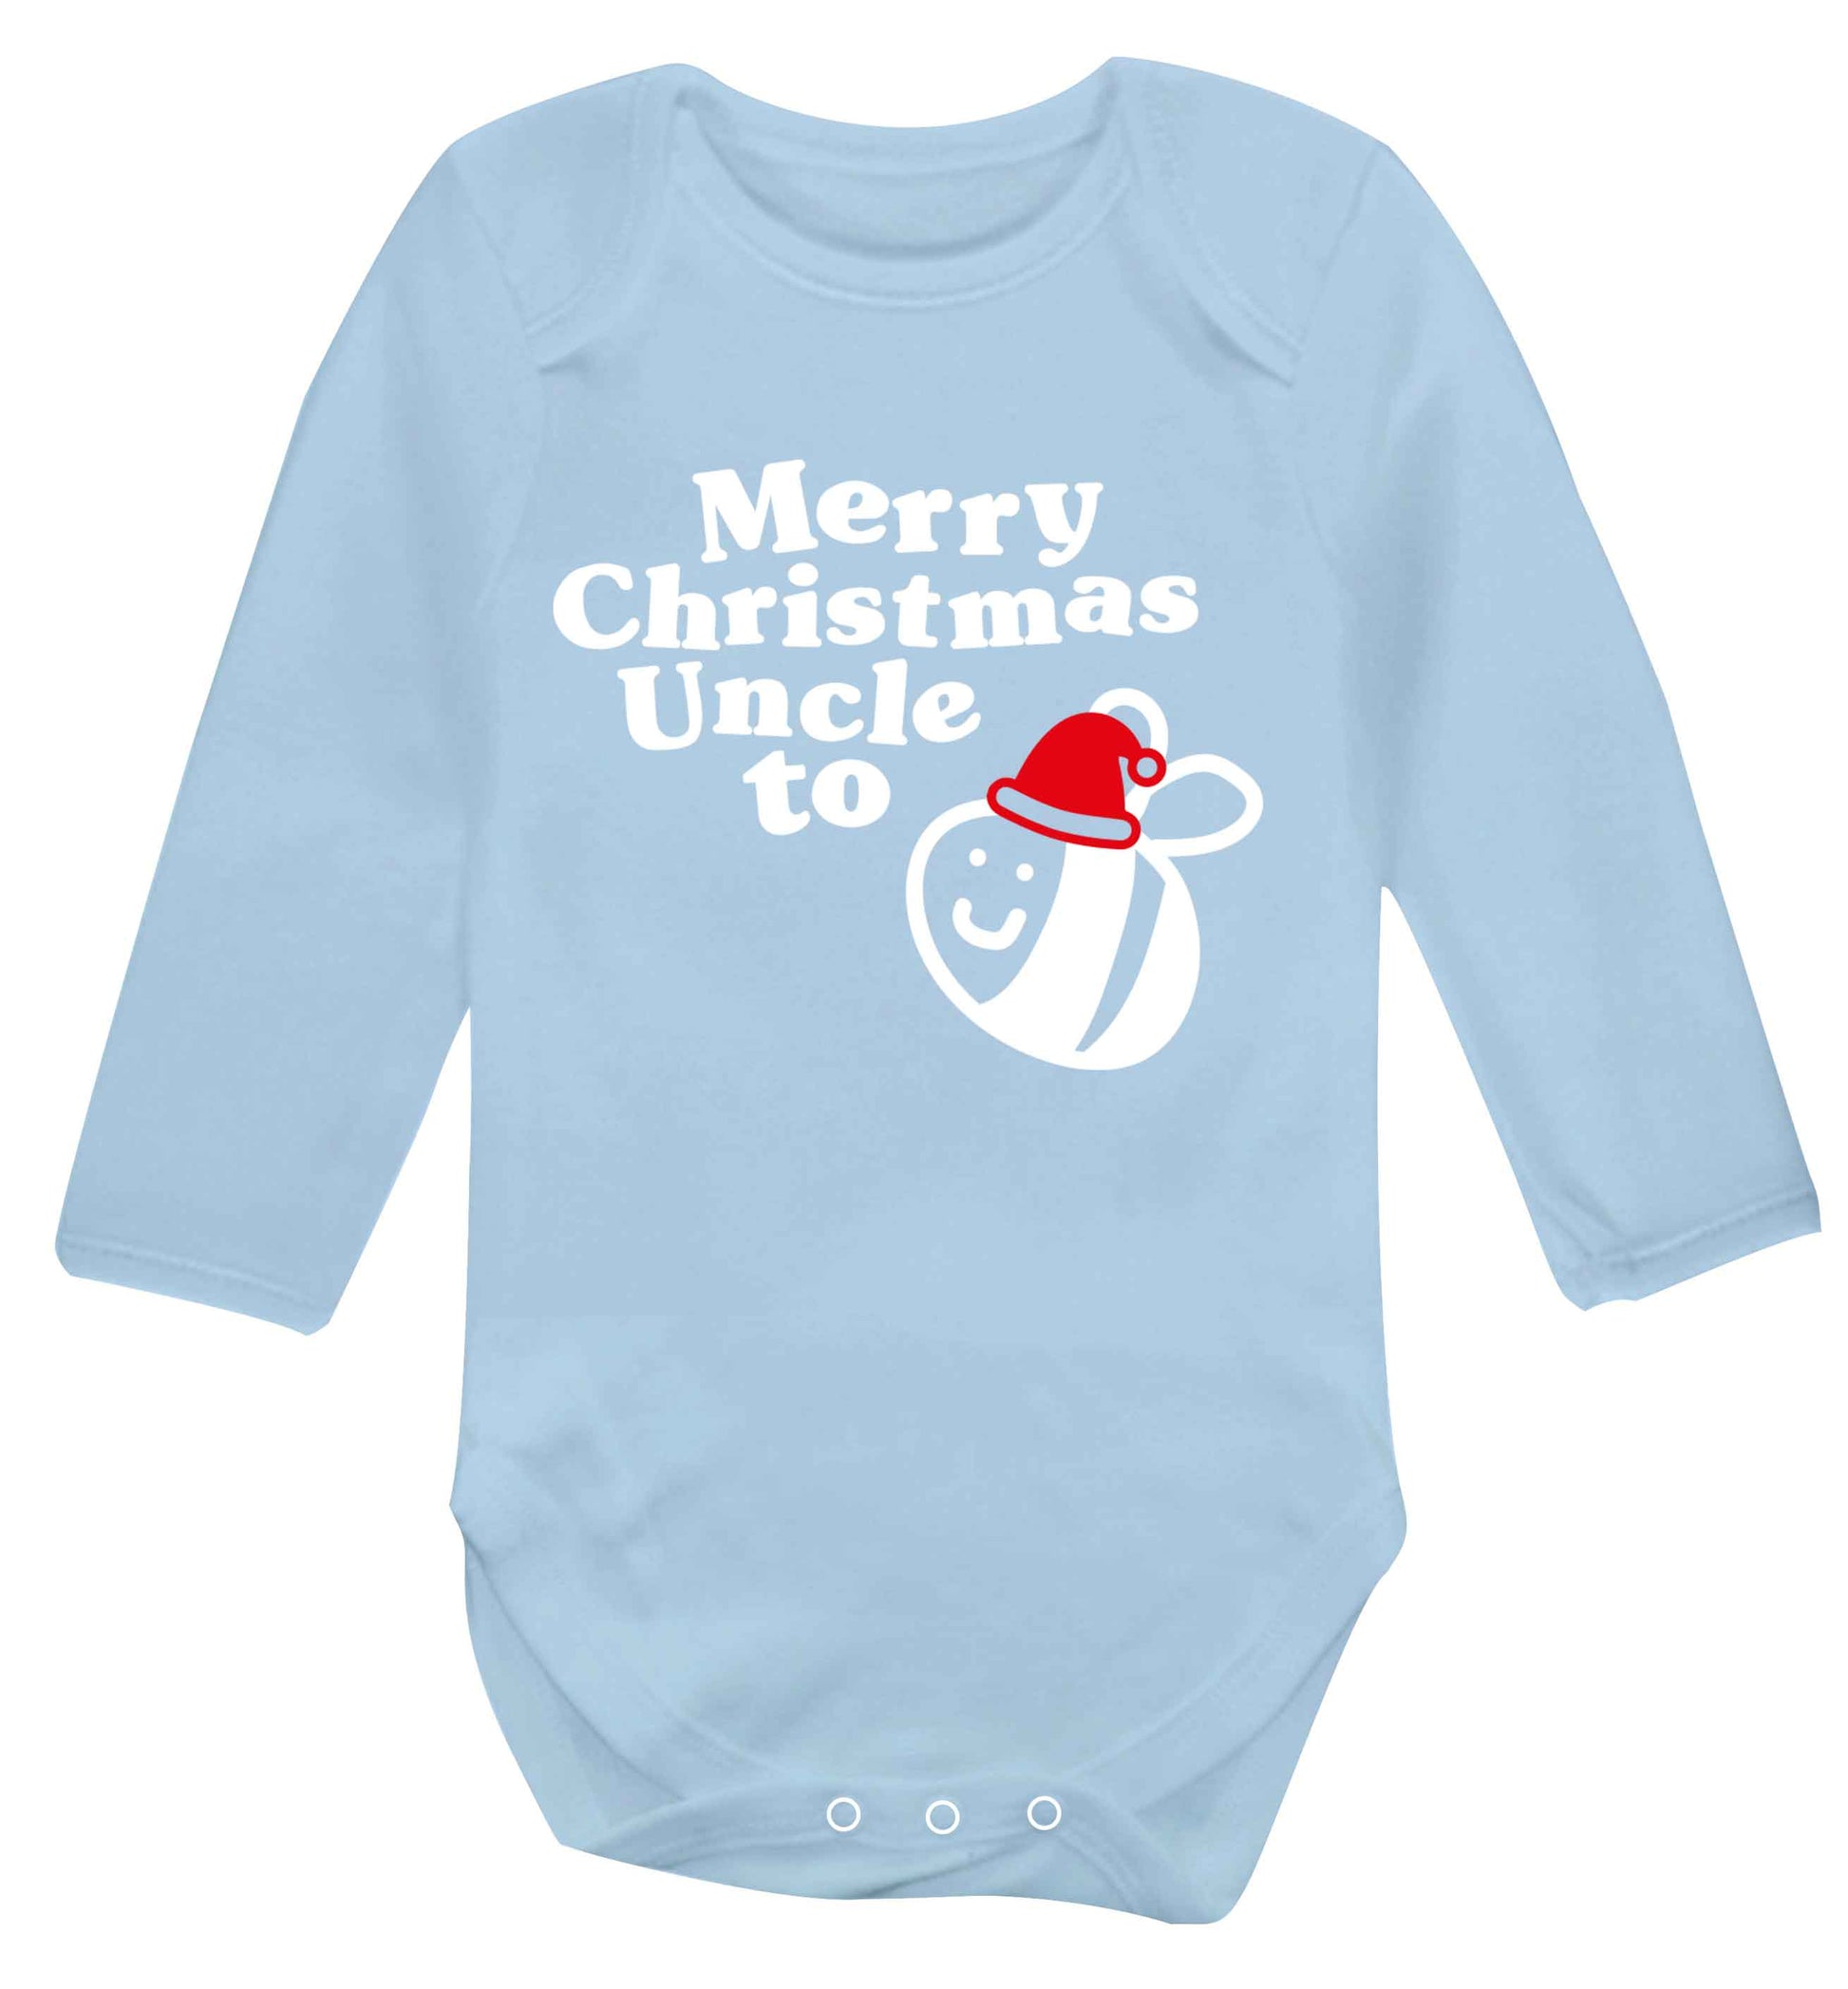 Merry Christmas uncle to be Baby Vest long sleeved pale blue 6-12 months